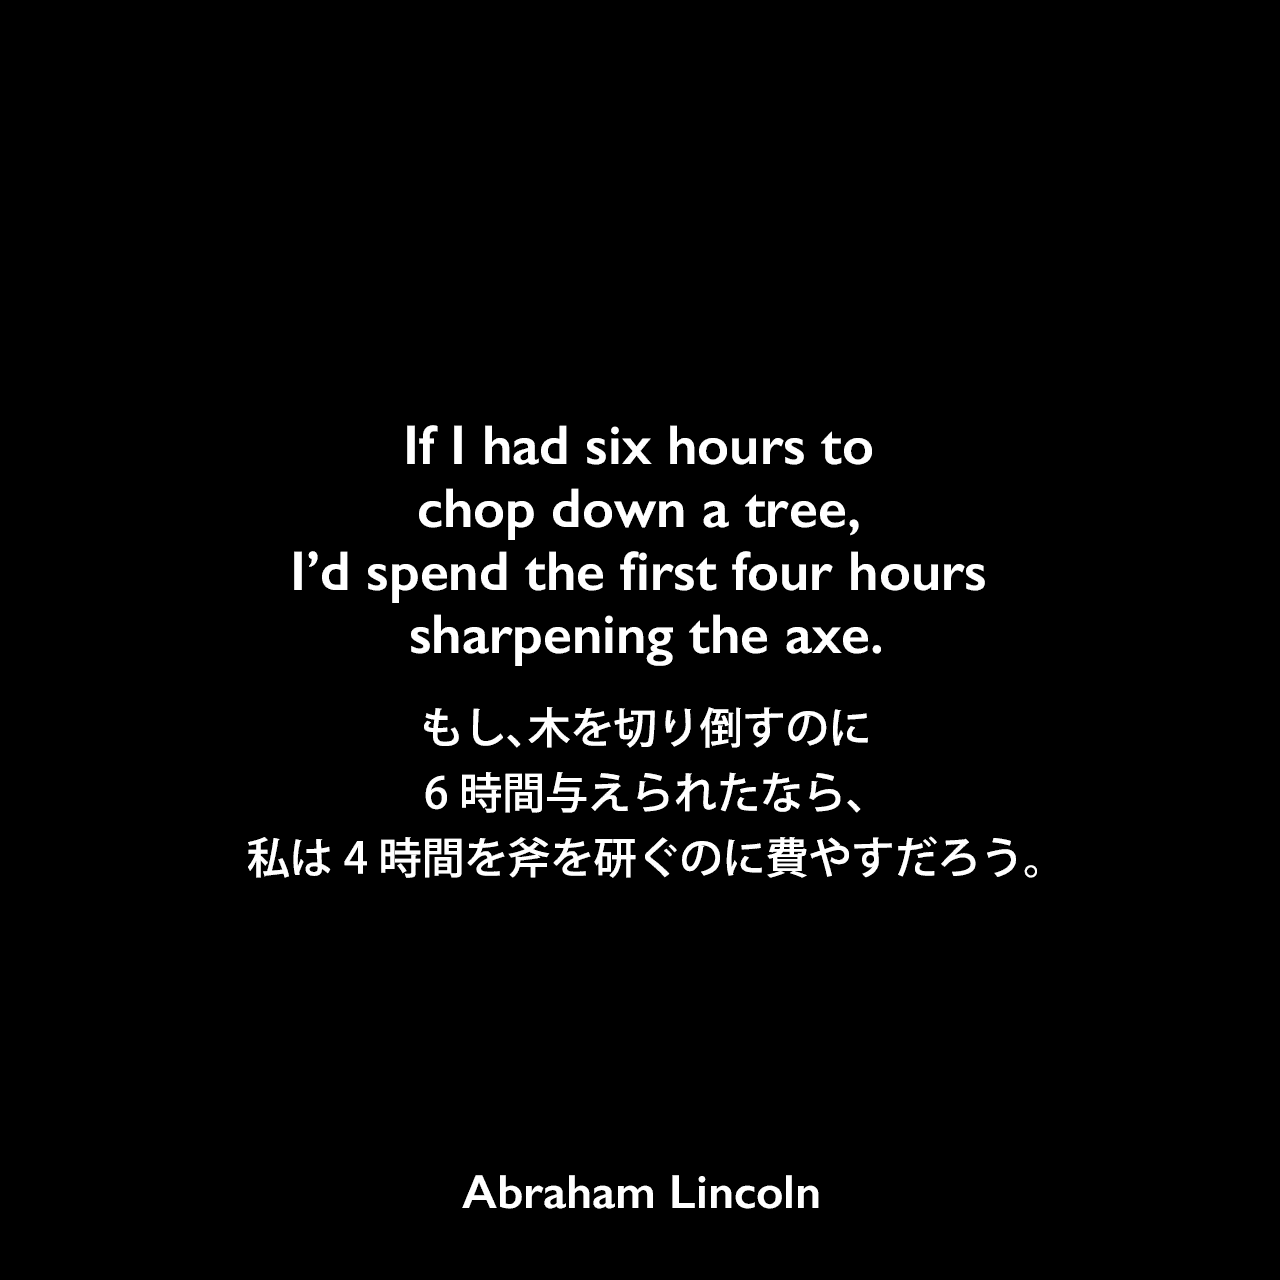 If I had six hours to chop down a tree, I’d spend the first four hours sharpening the axe.もし、木を切り倒すのに8時間与えられたなら、私は６時間を斧を研ぐのに費やすだろう。